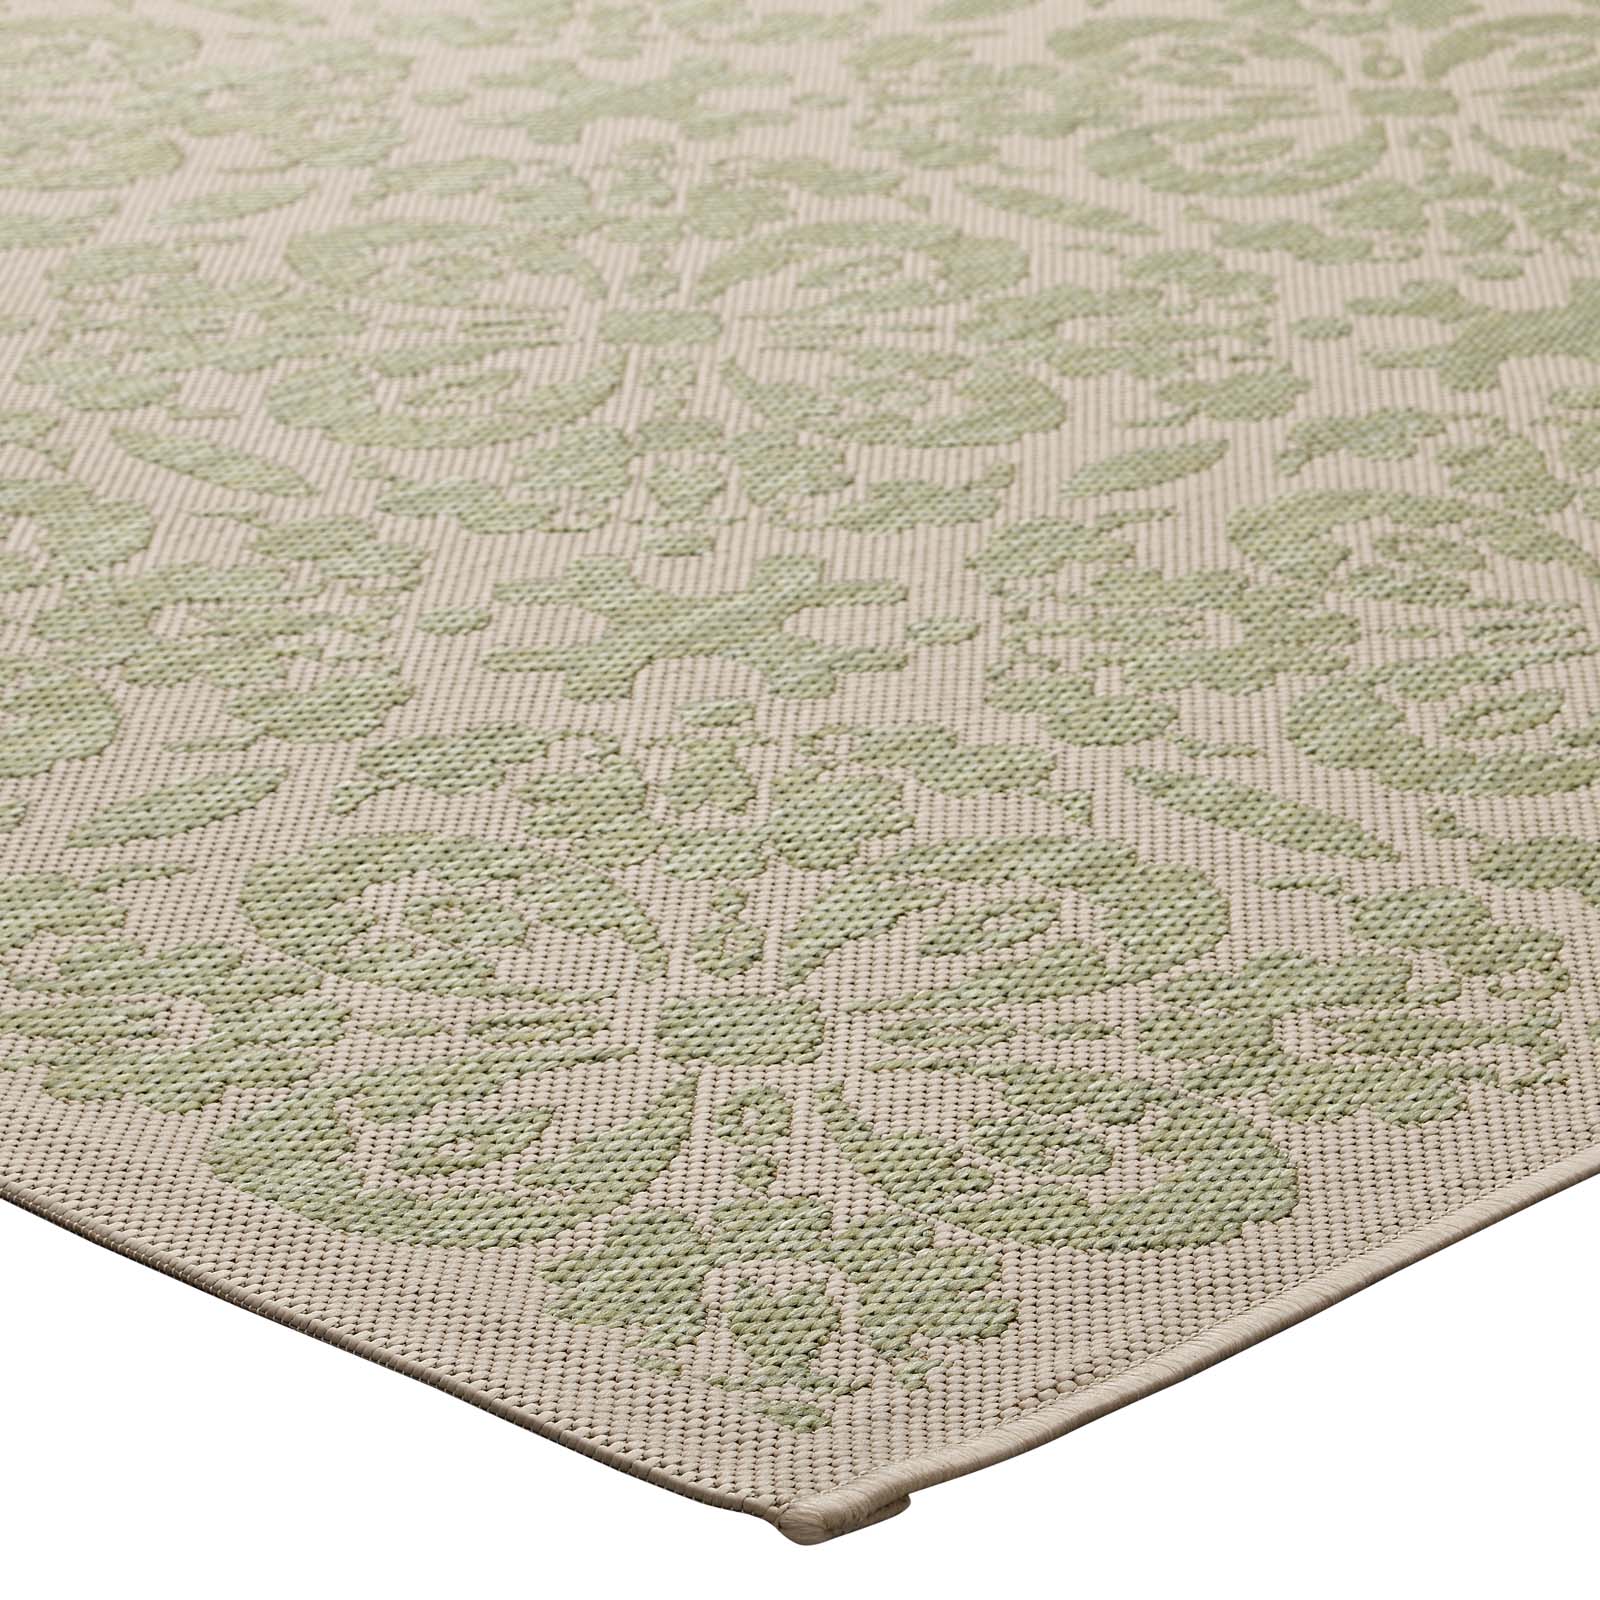 Modway Outdoor Rugs - Ariana Floral Trellis 8'x10' Outdoor Area Rug Light Green & Beige